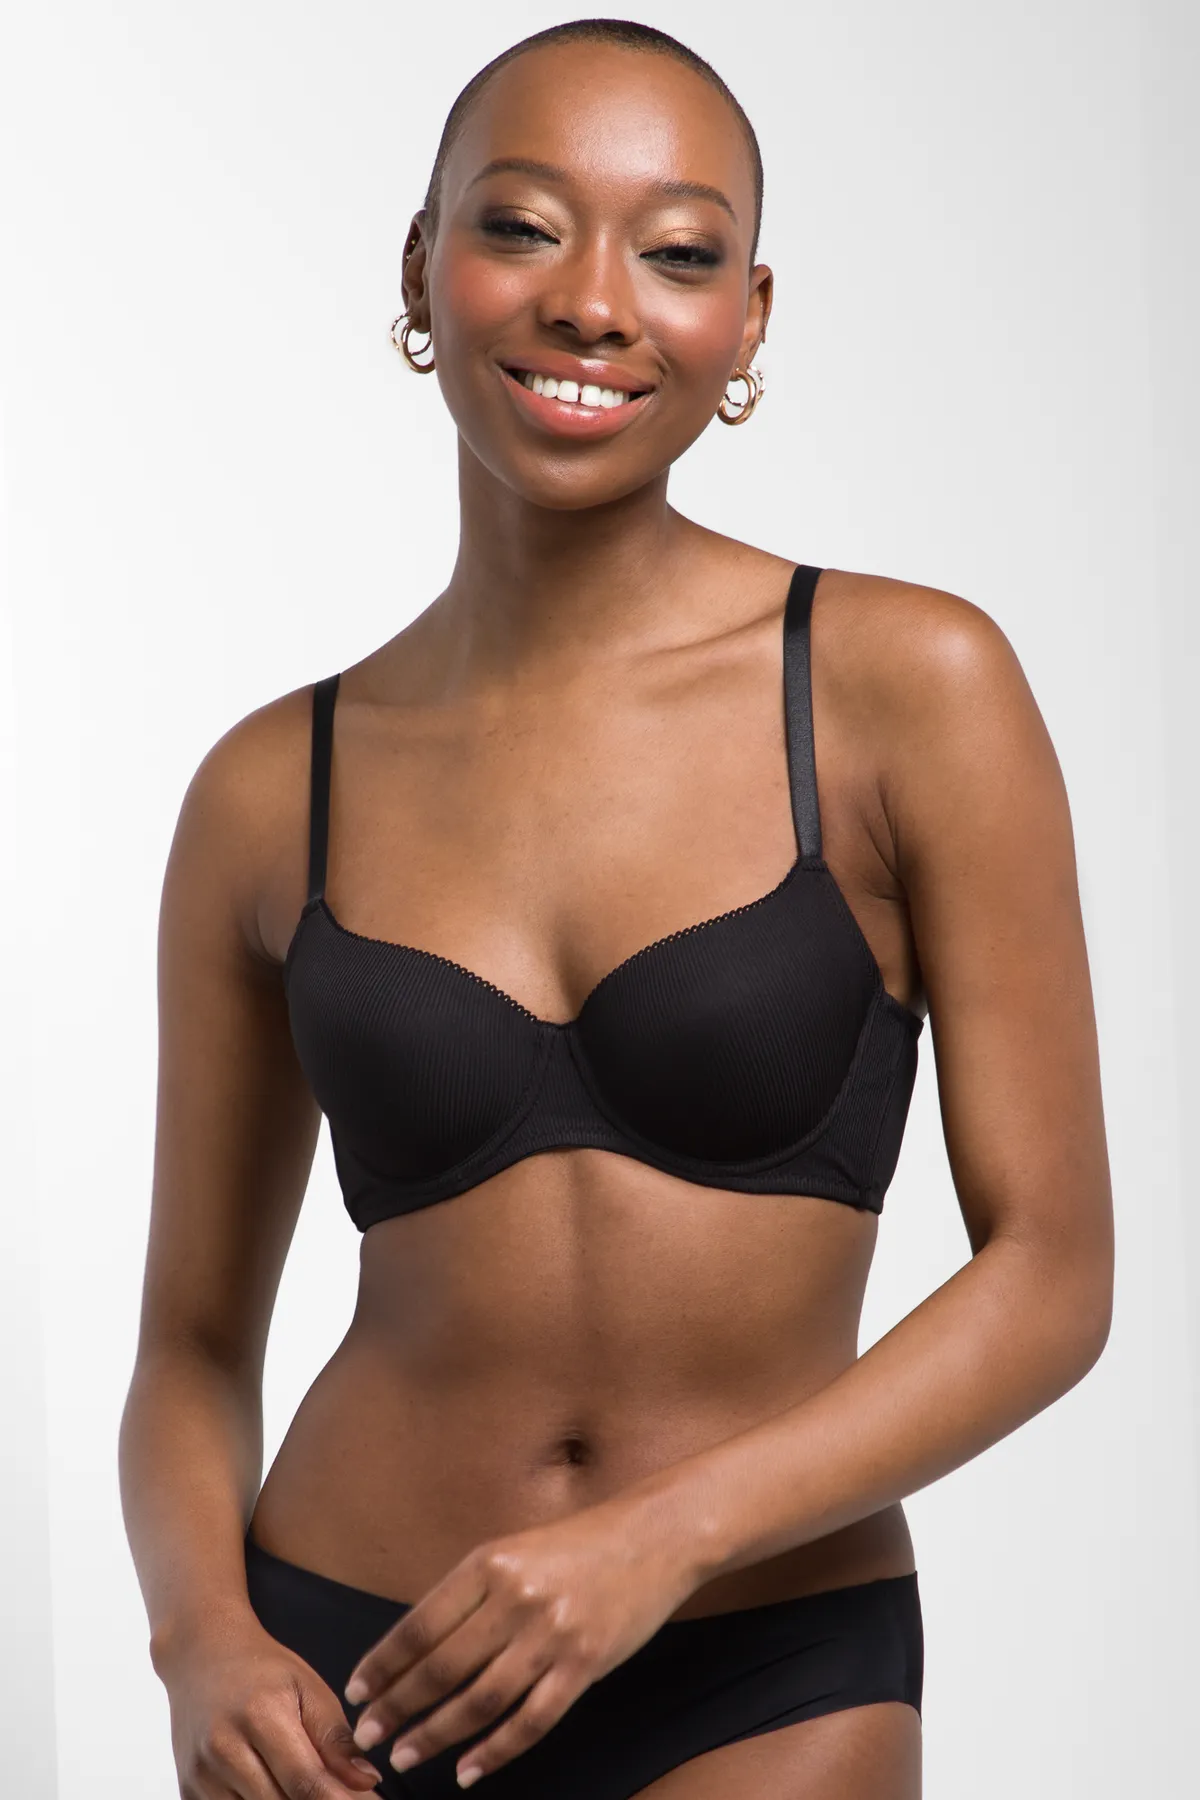 Ackermans - With 2-pack bras for 99.95, you pay less than 50.00